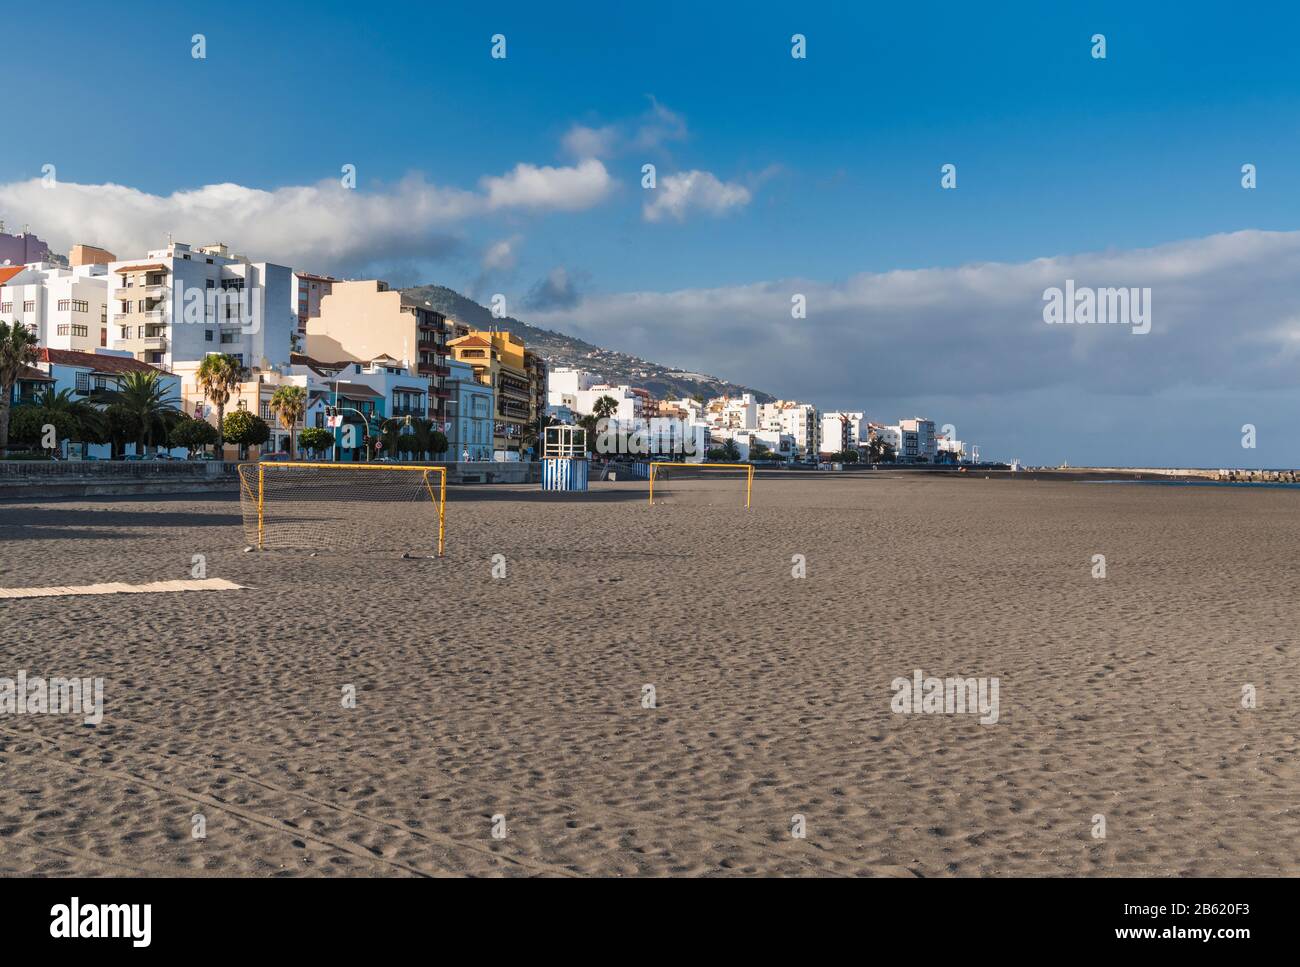 The sandy beach on the seafront in Santa Cruz de La Palma with goalposts for beach football, almost deserted on a summer's evening Stock Photo